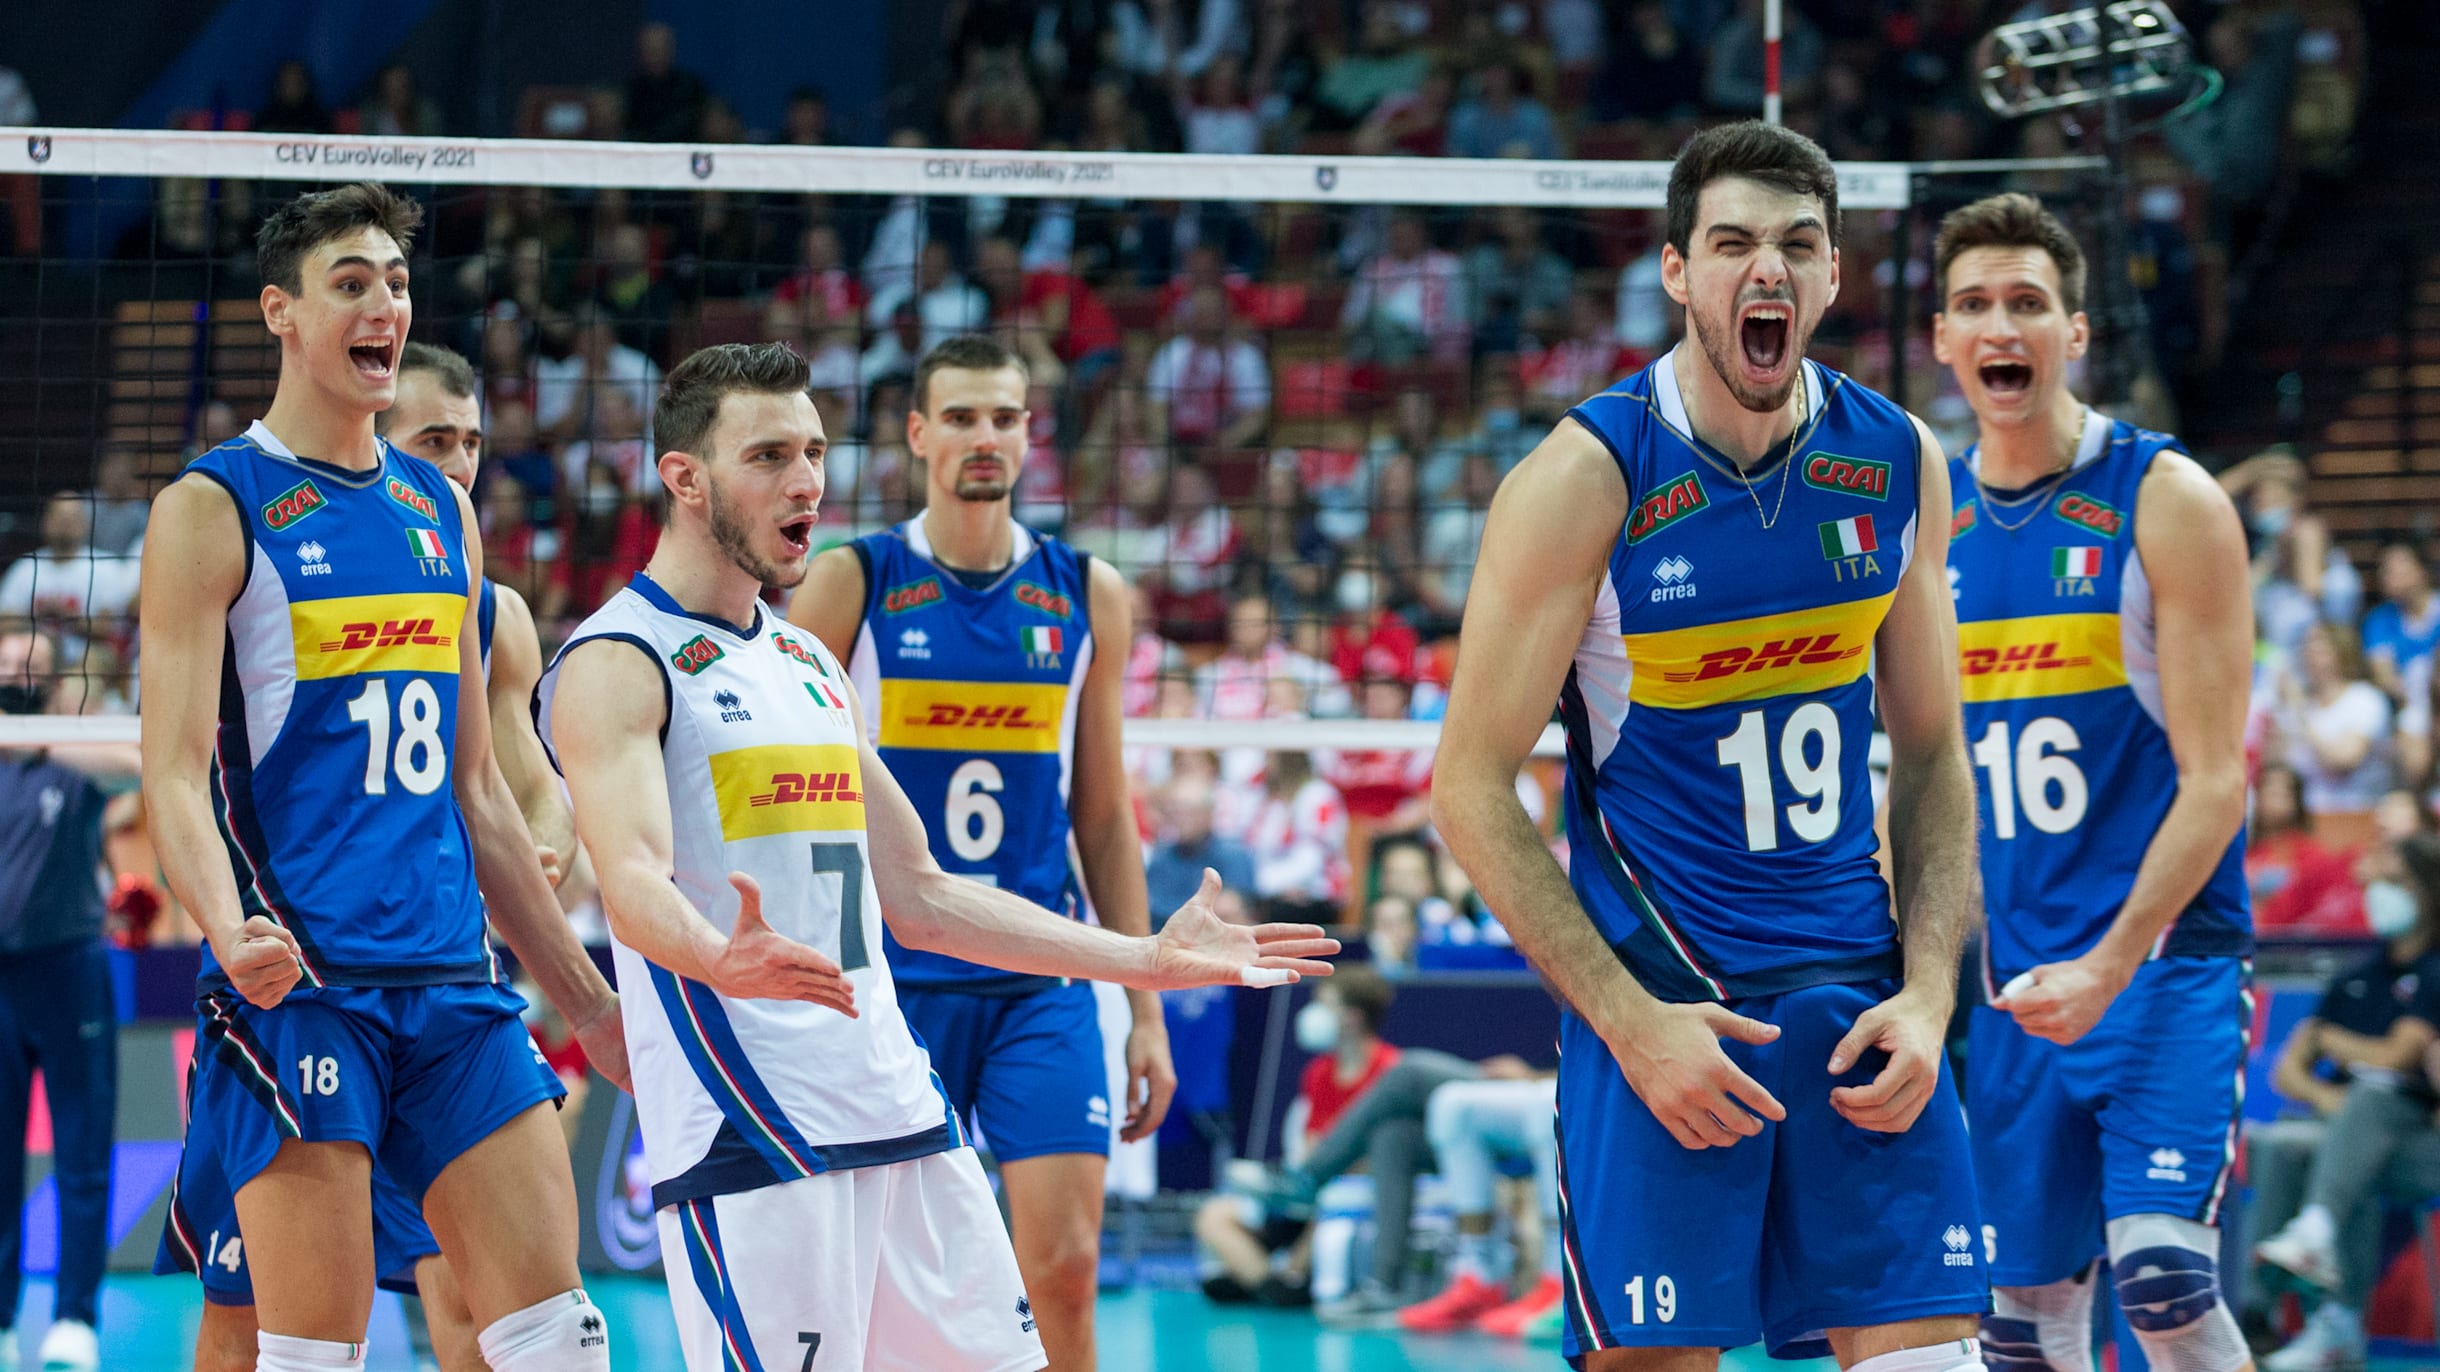 2023 Mens European Volleyball Championship Preview, schedule and how to watch live